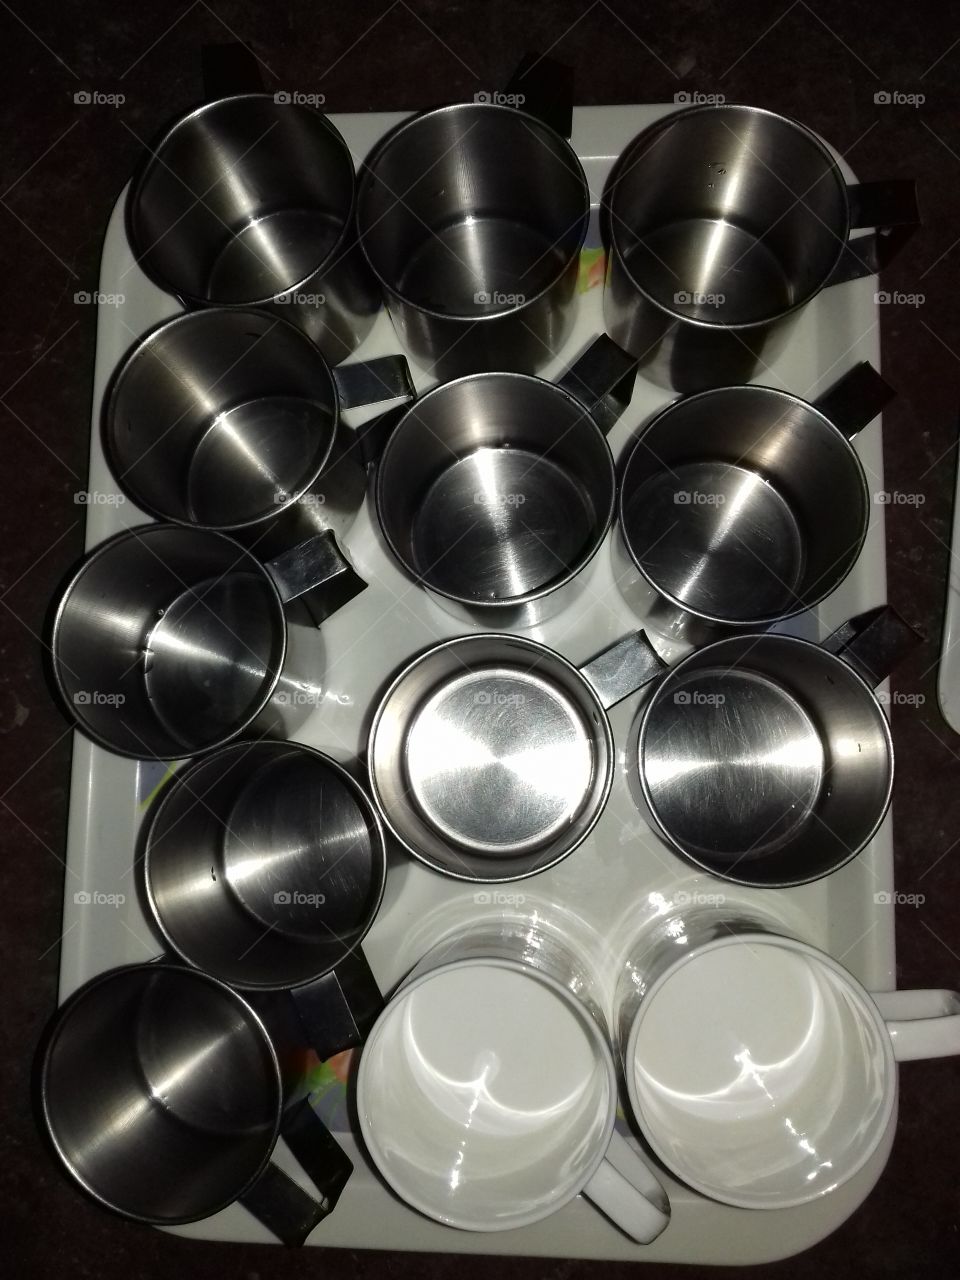 tea cups stainless